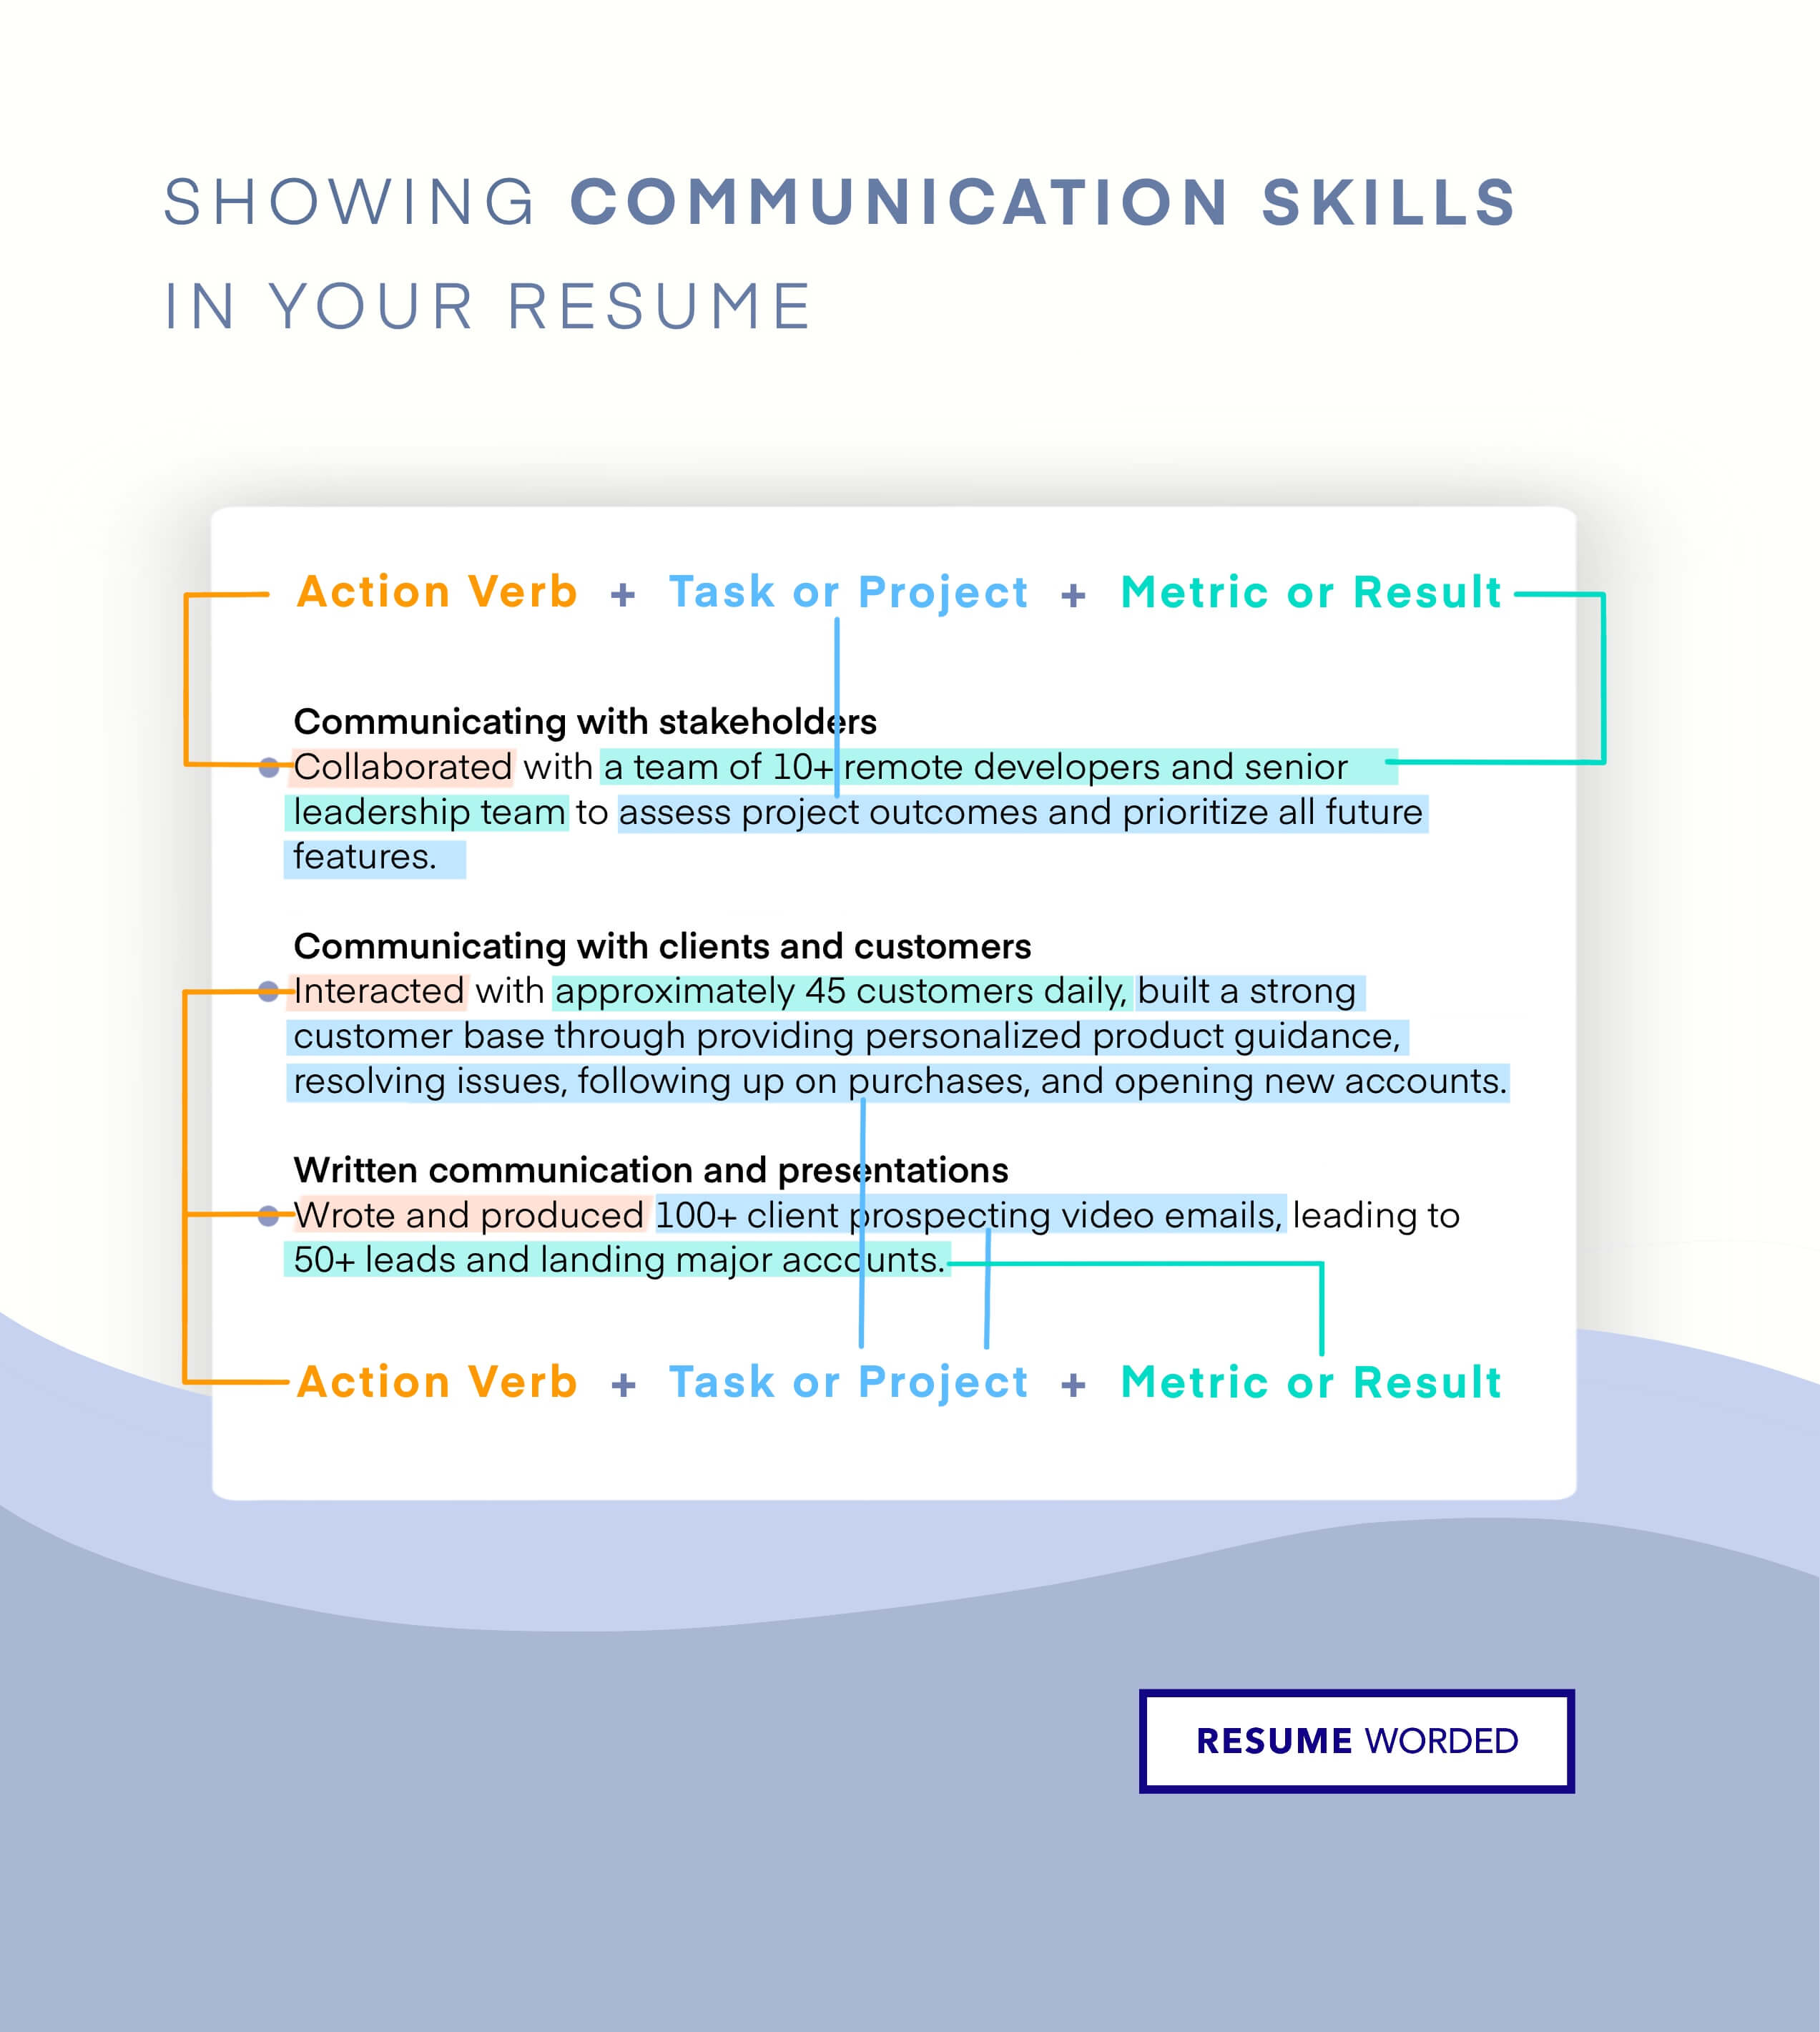 Proof of your communication skills - System Administrator CV